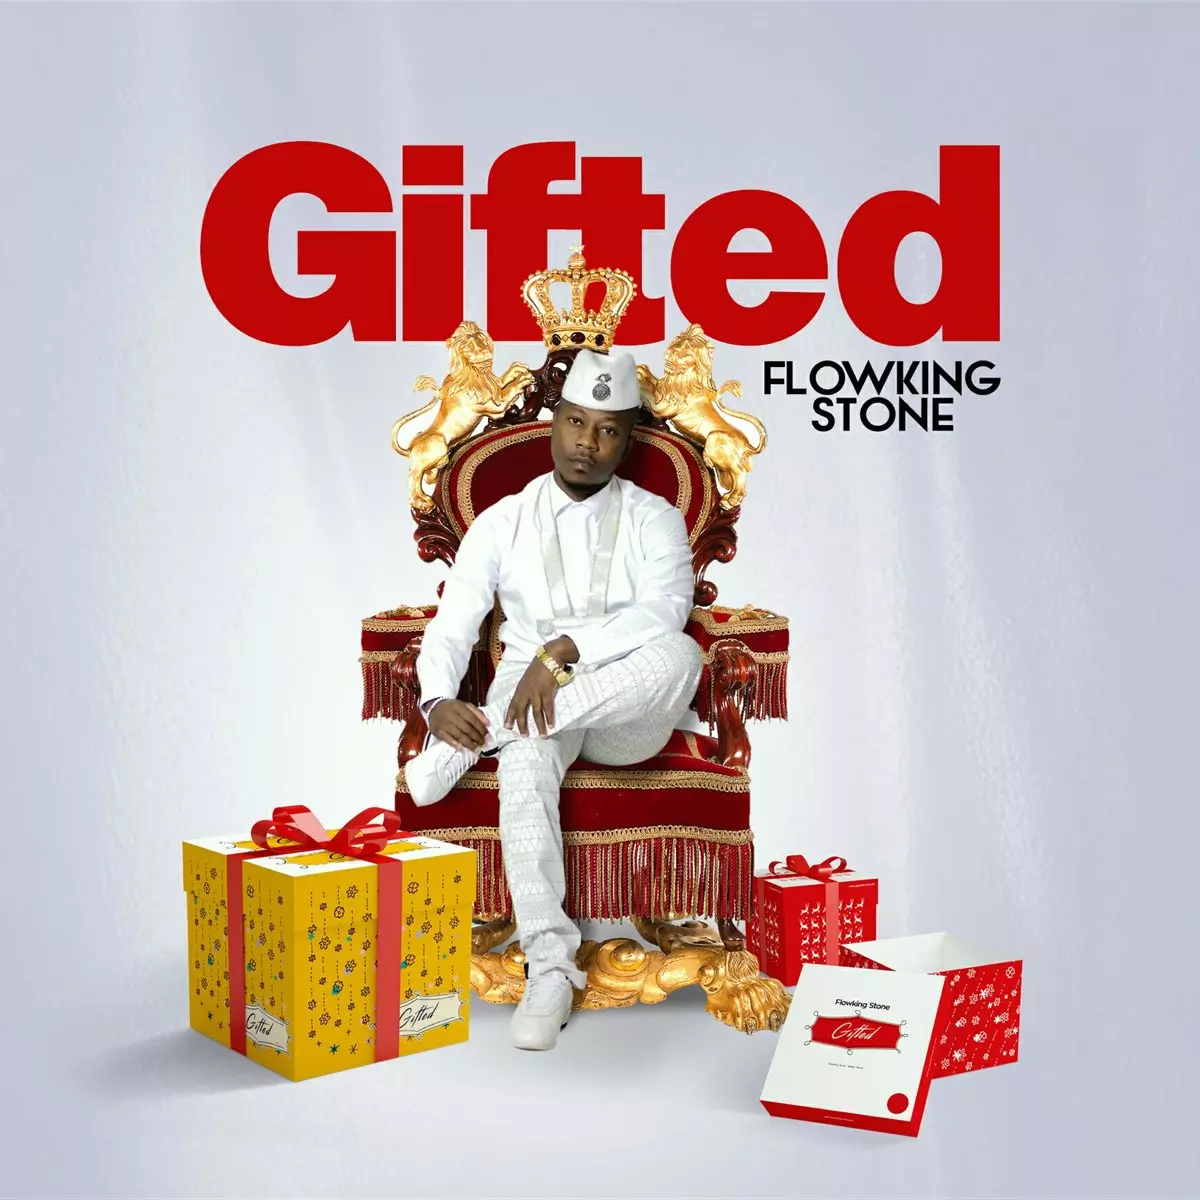 Gifted by Flowking Stone on Apple Music